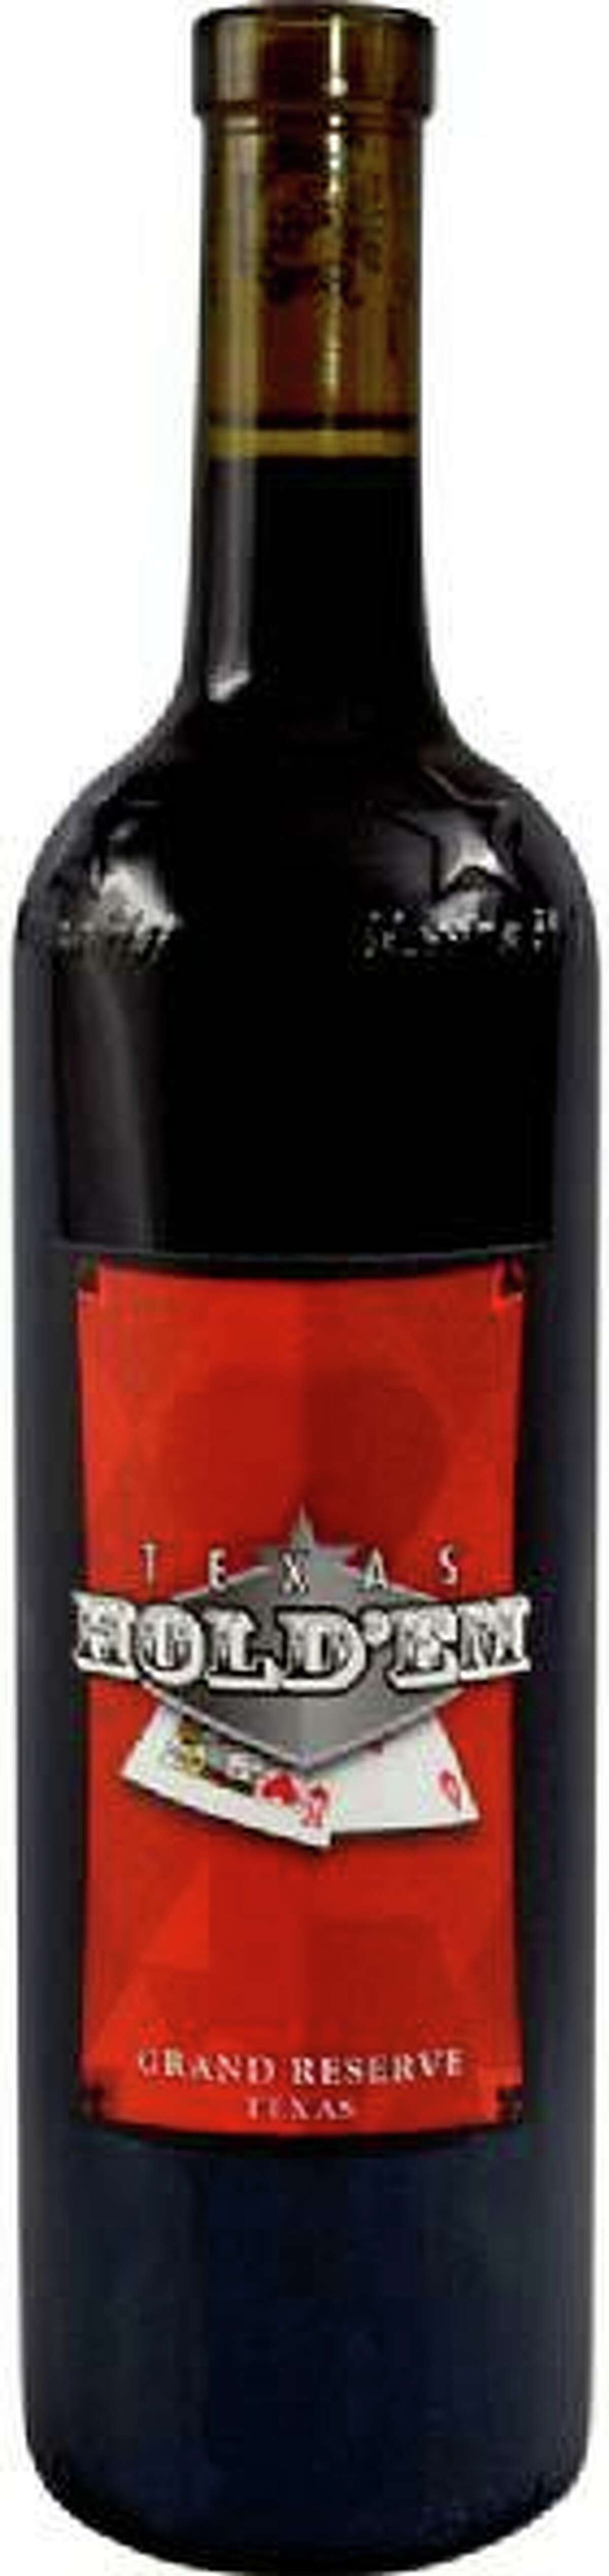 Messina Hof ‘Texas Hold Em” Red Blend wine is featured at Saltgrass Steakhouses throughout Texas. This red wine pairs great with Saltgrass’s grilled steaks.